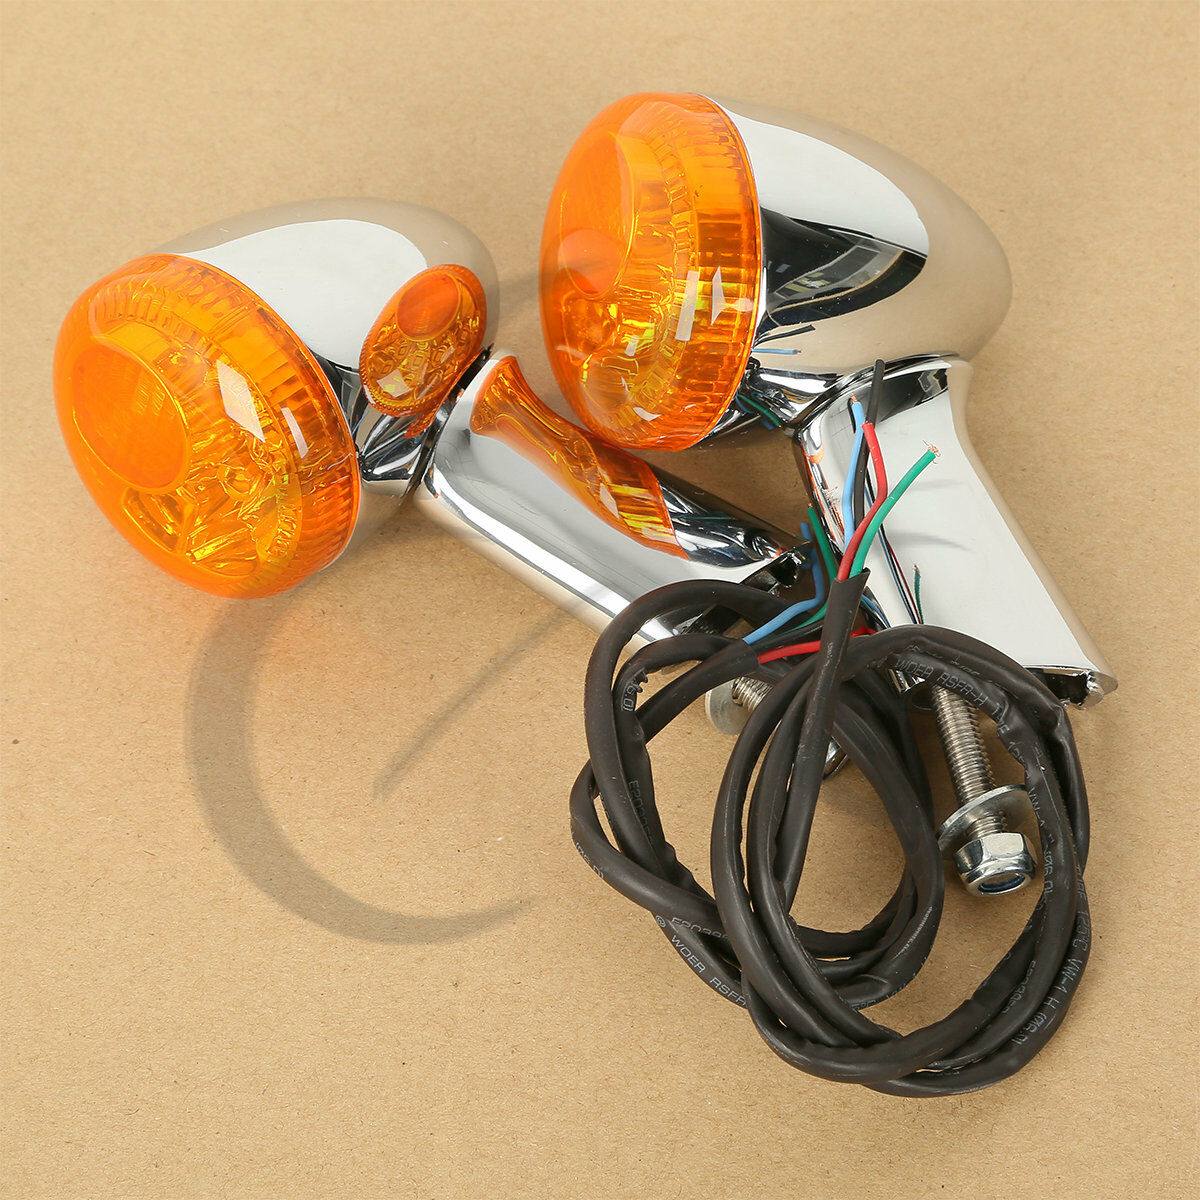 Rear Turn Signals LED Light Bracket Fit For Harley Sportster XL883 1200 92-Up - Moto Life Products